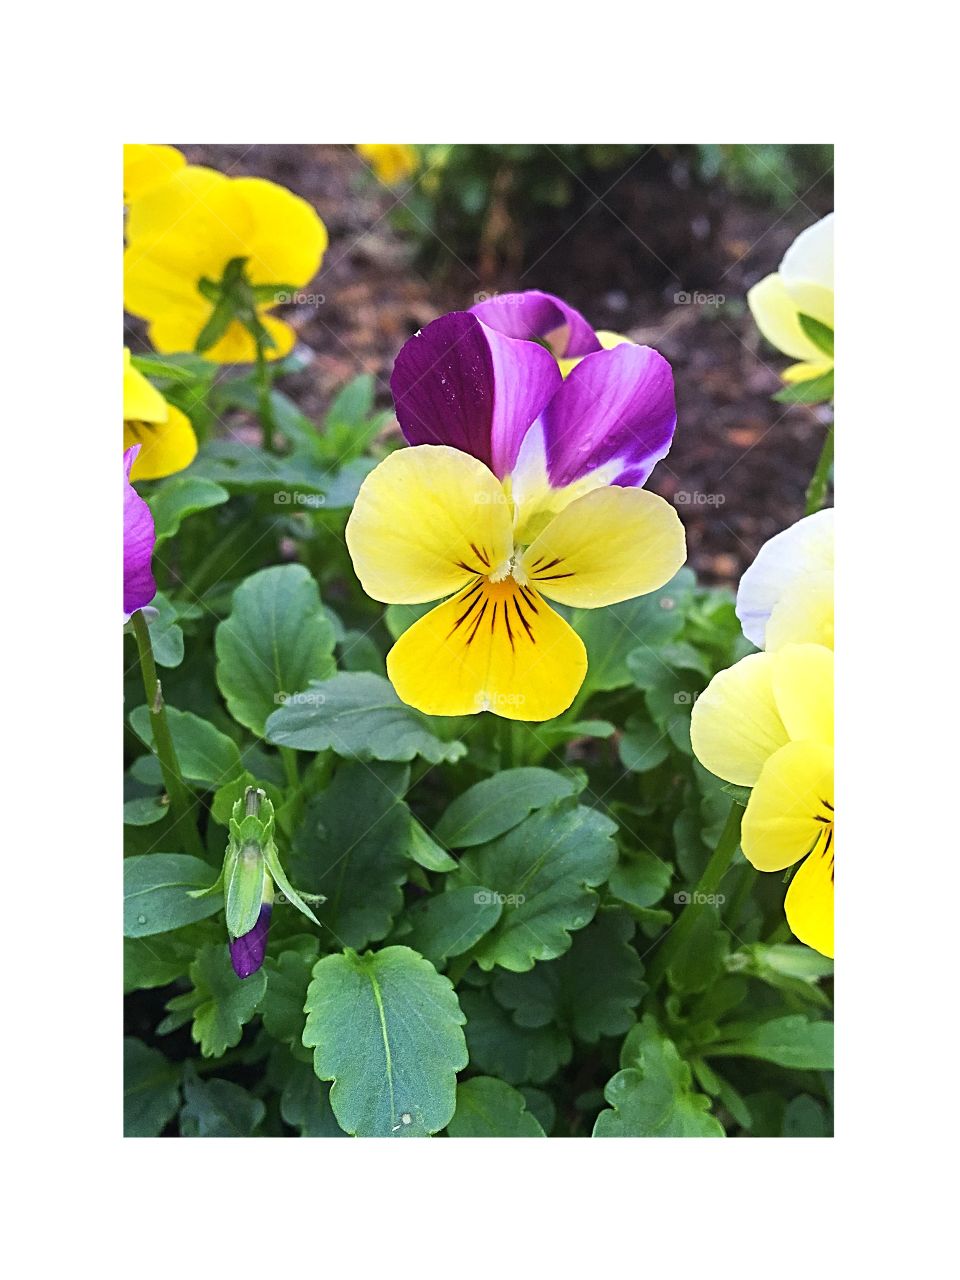 Cute little yellow flower that mixed with purple. 